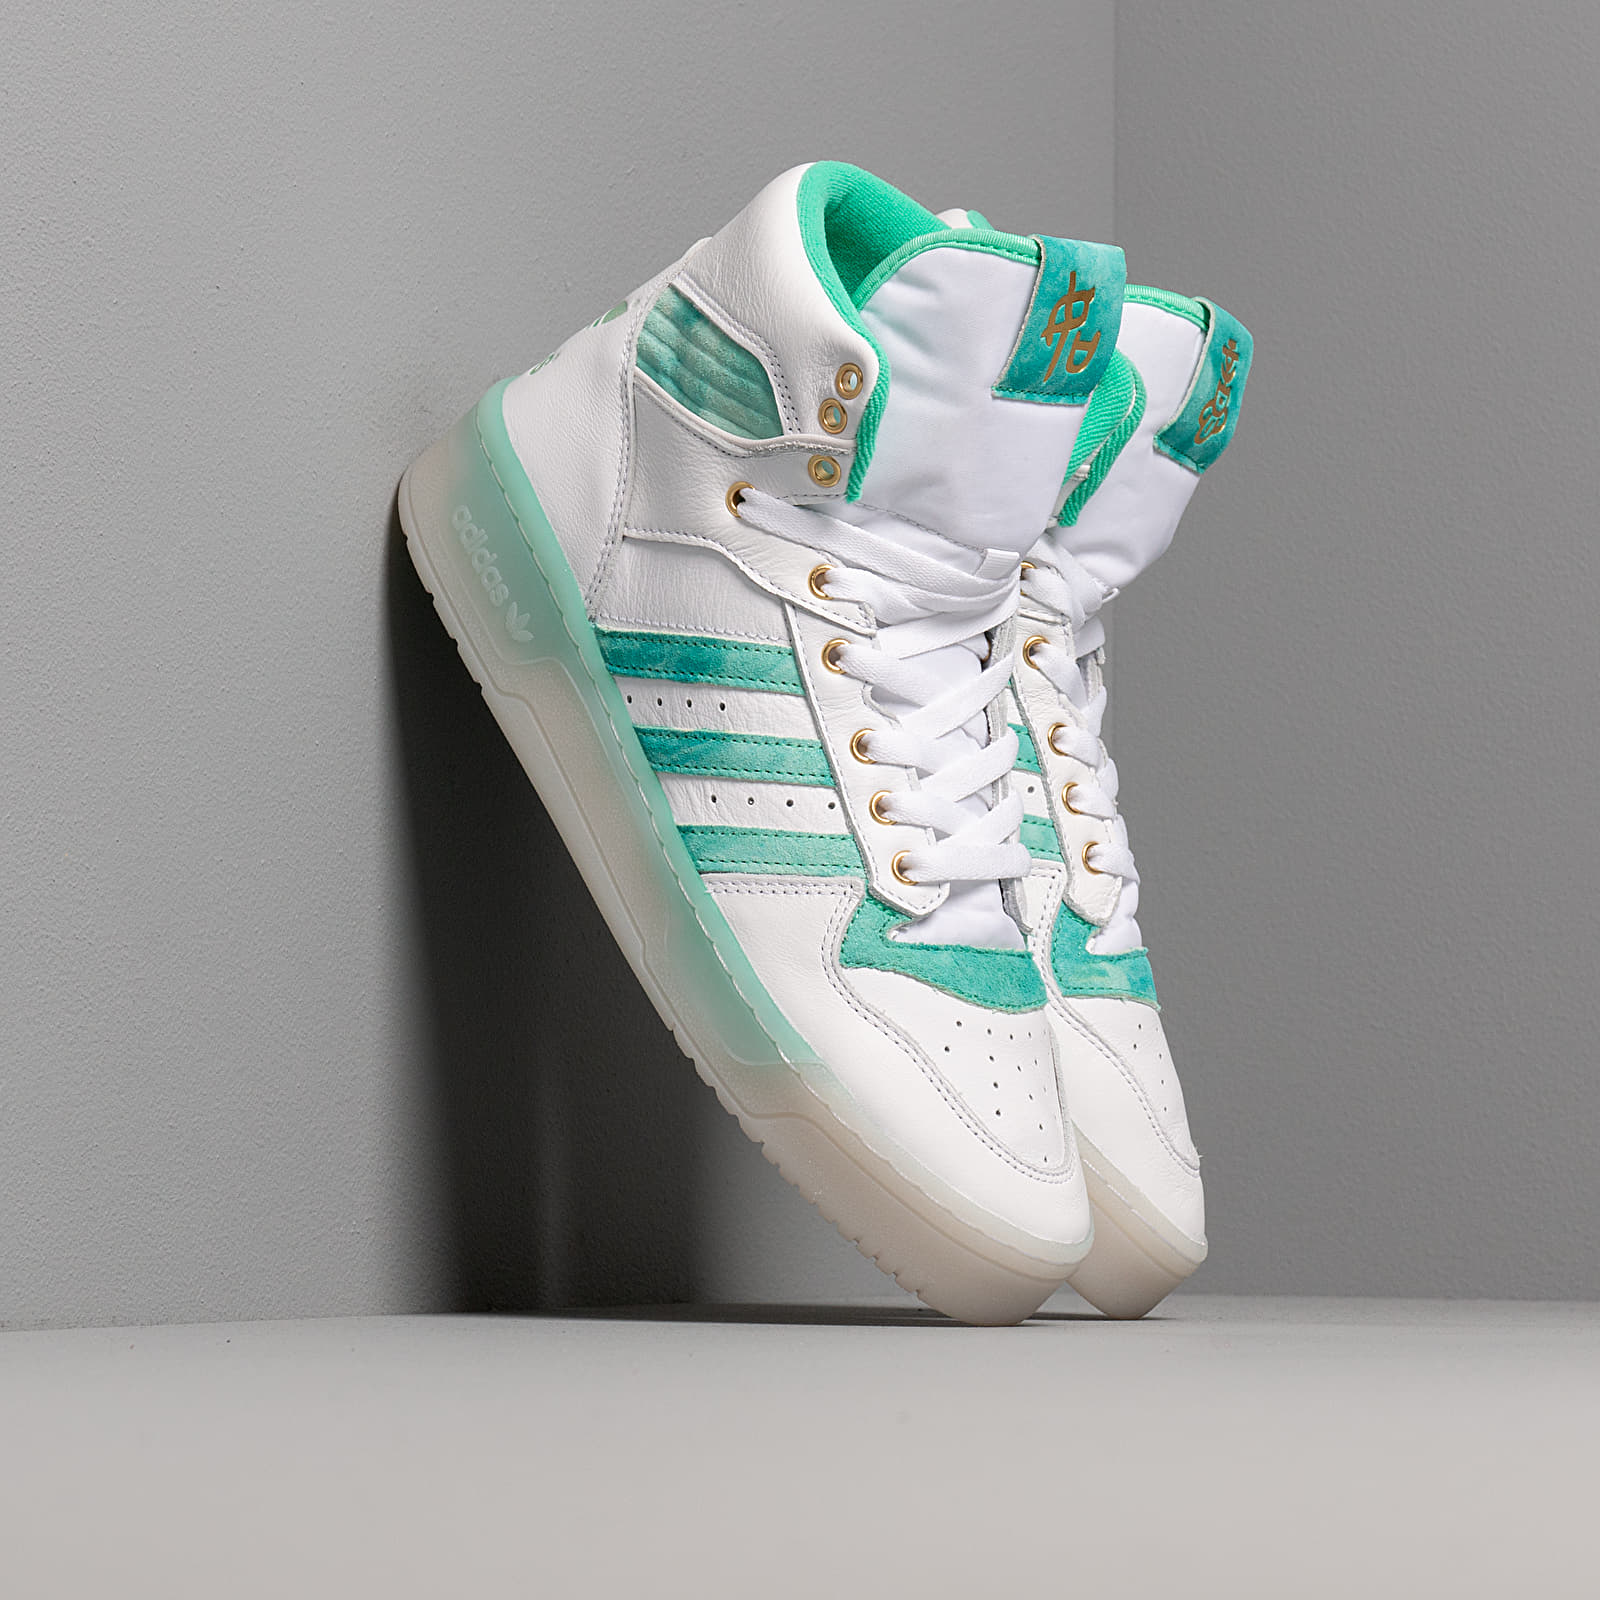 Buty męskie adidas Rivalry Ftwr White/ Hi-Res Green S18/ Gold Foil